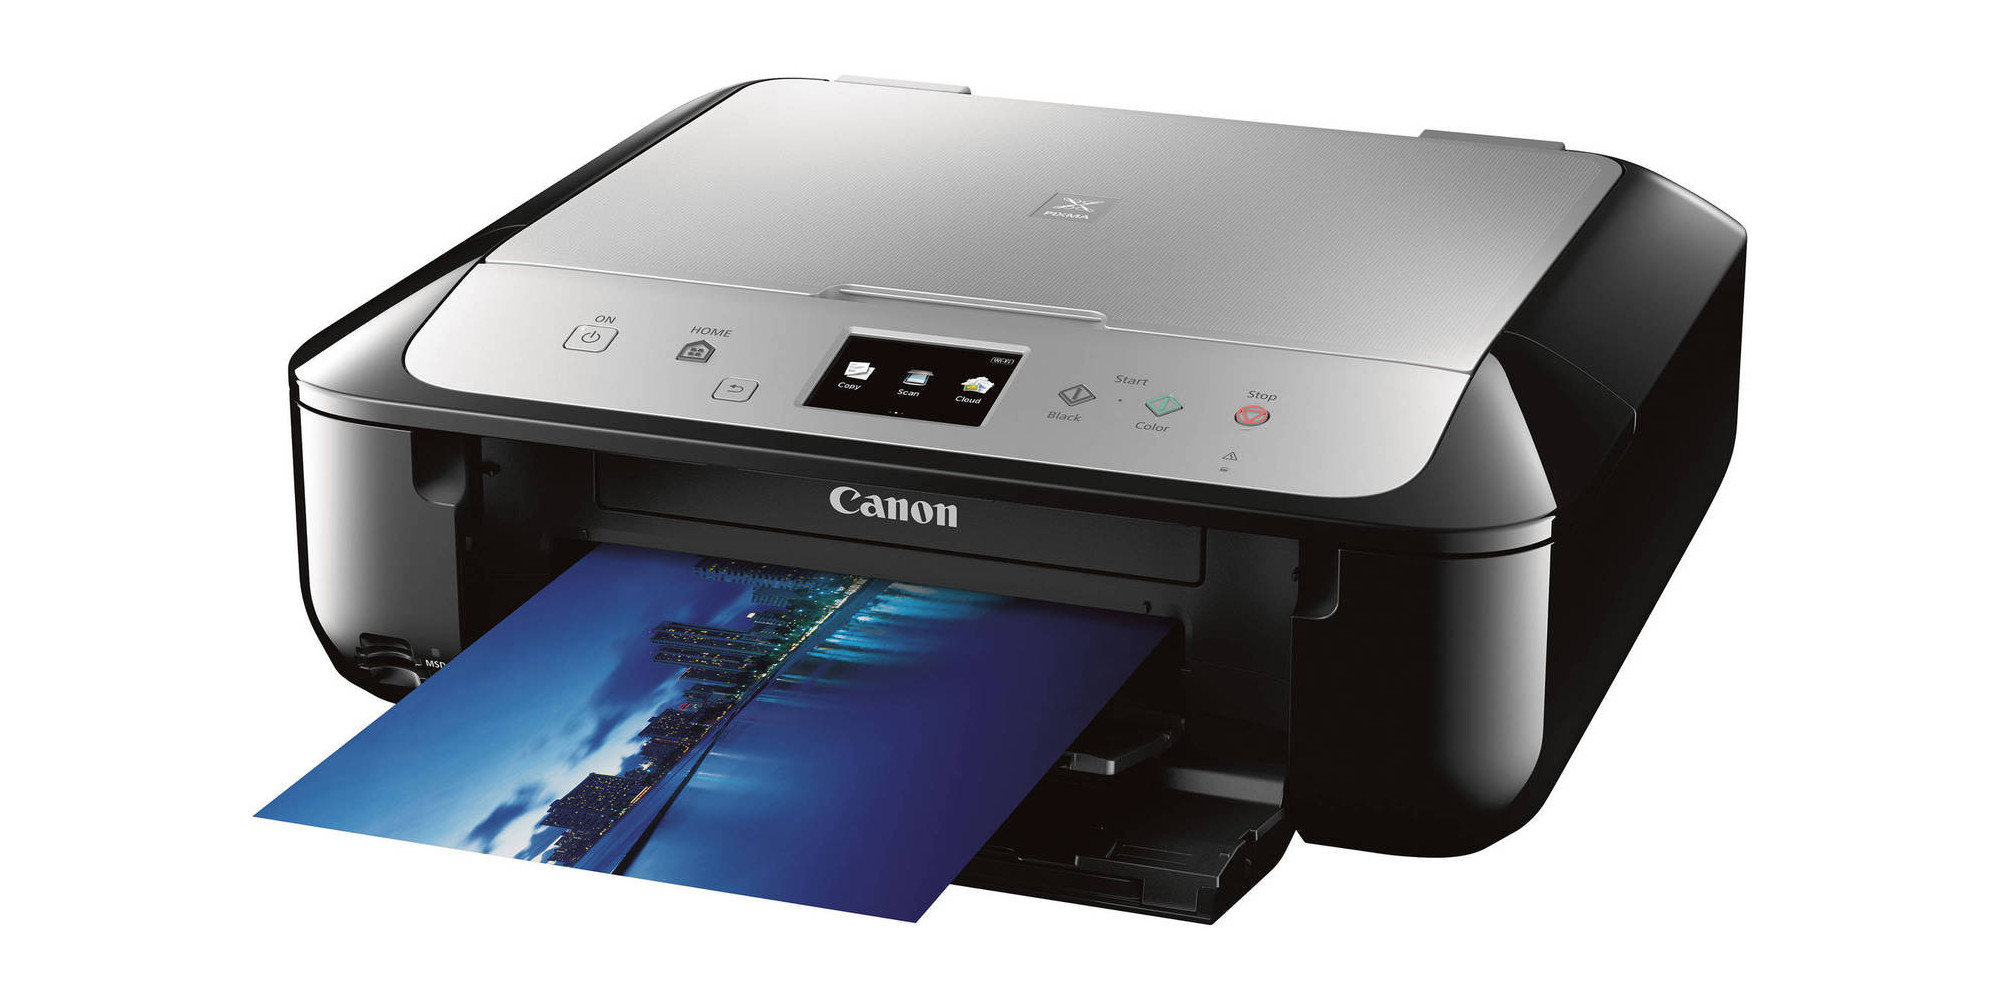 Canon PIXMA Wireless Photo All-in-One Inkjet Printer just $35 shipped